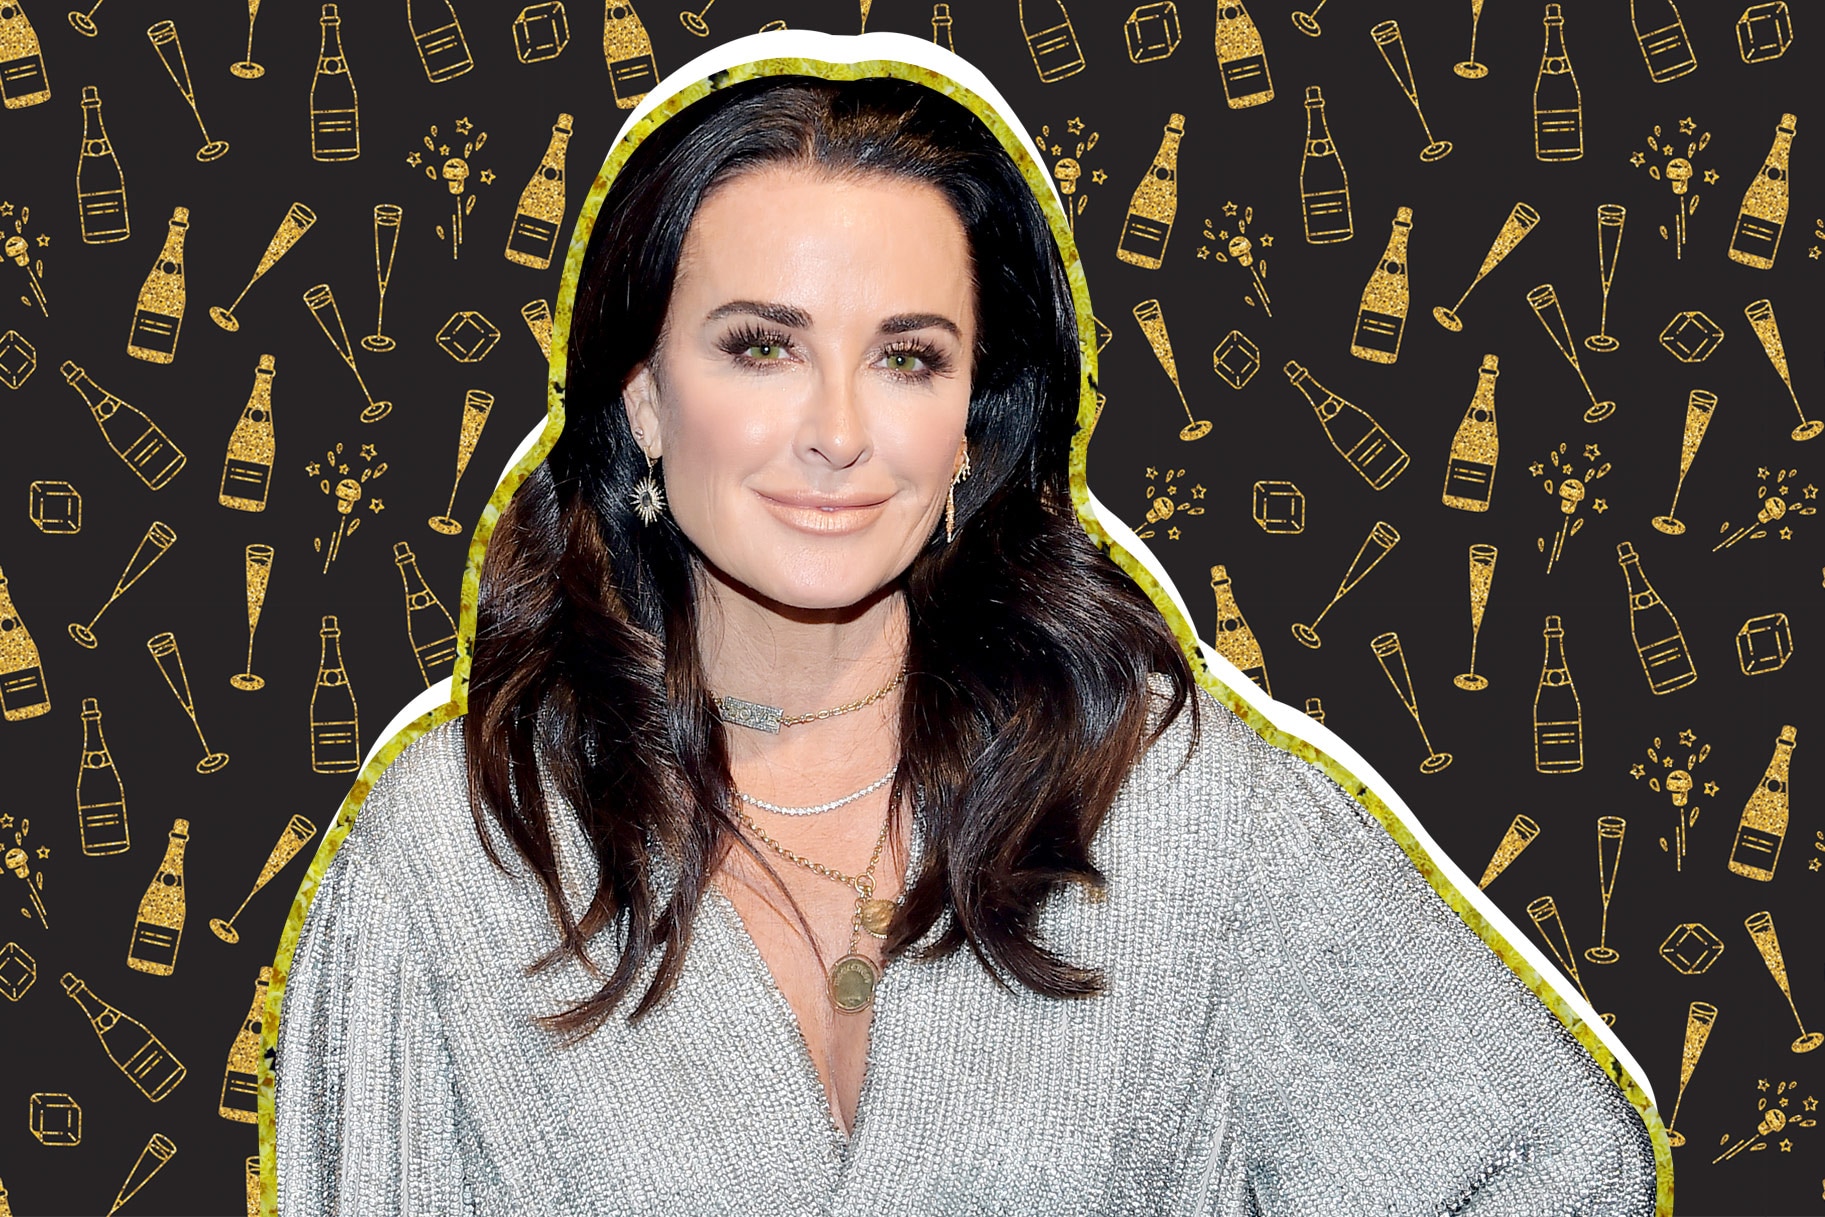 Kyle Richards Champagne Daughter Rhobh